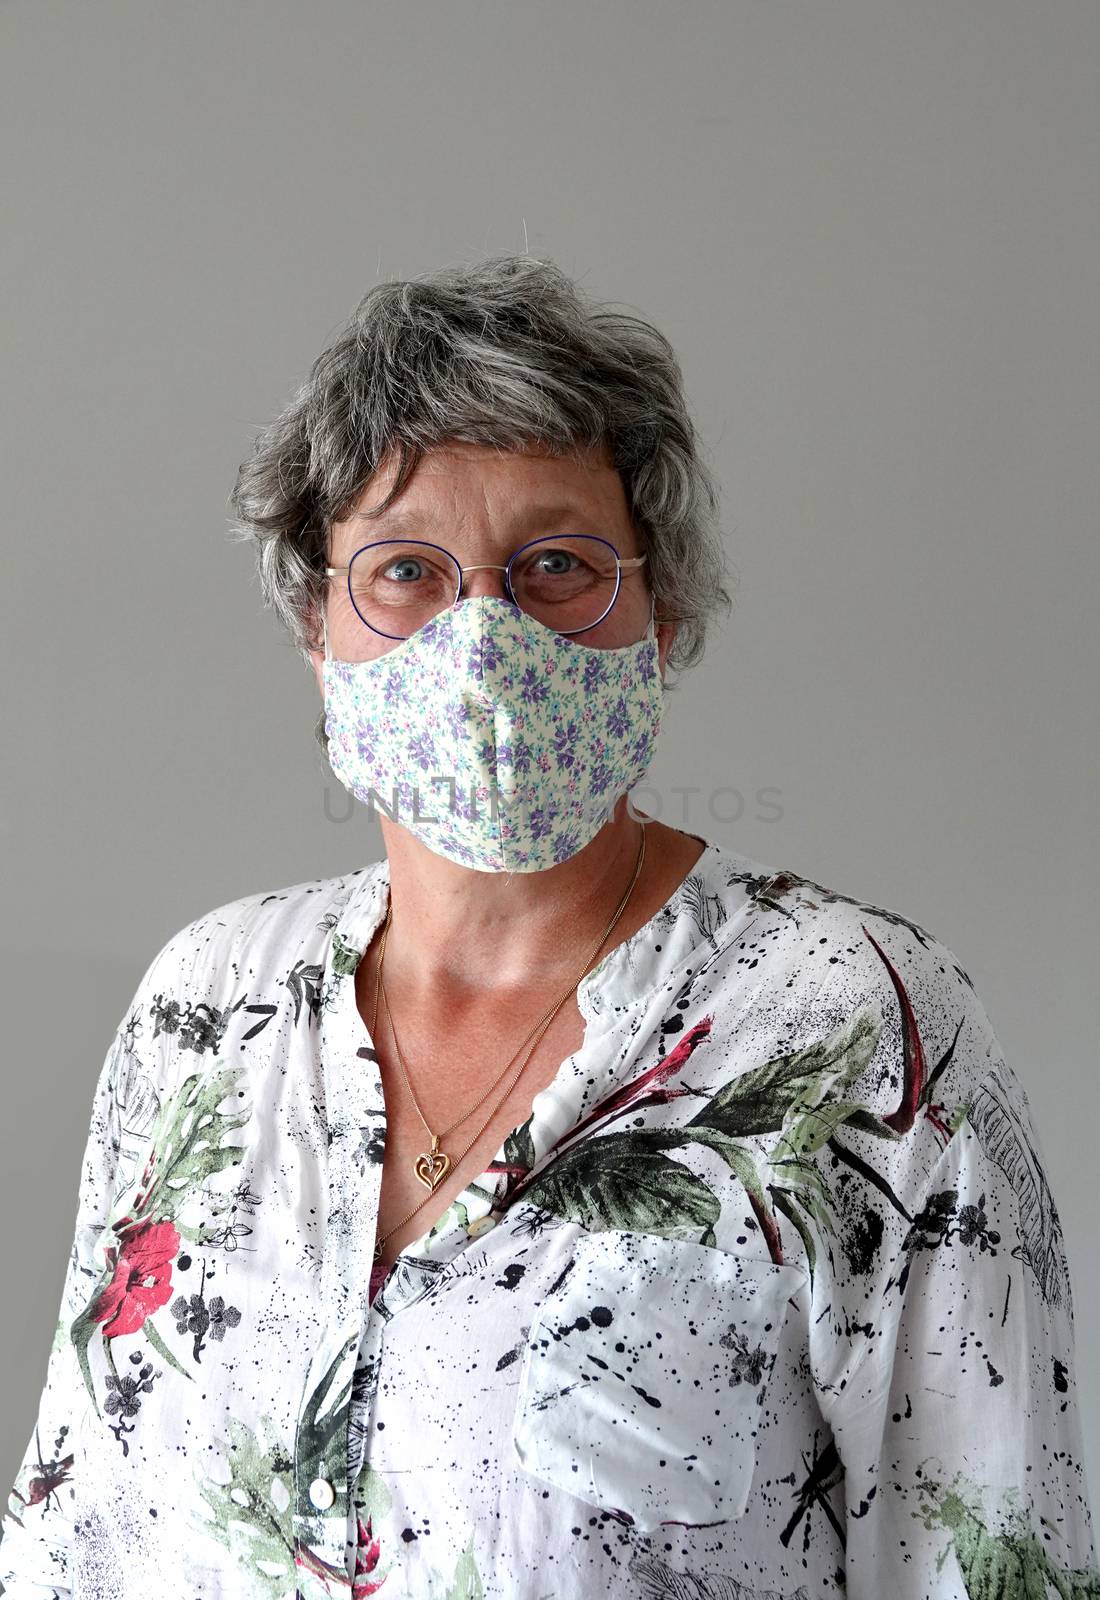 adult woman wearing protection face mask against coronavirus